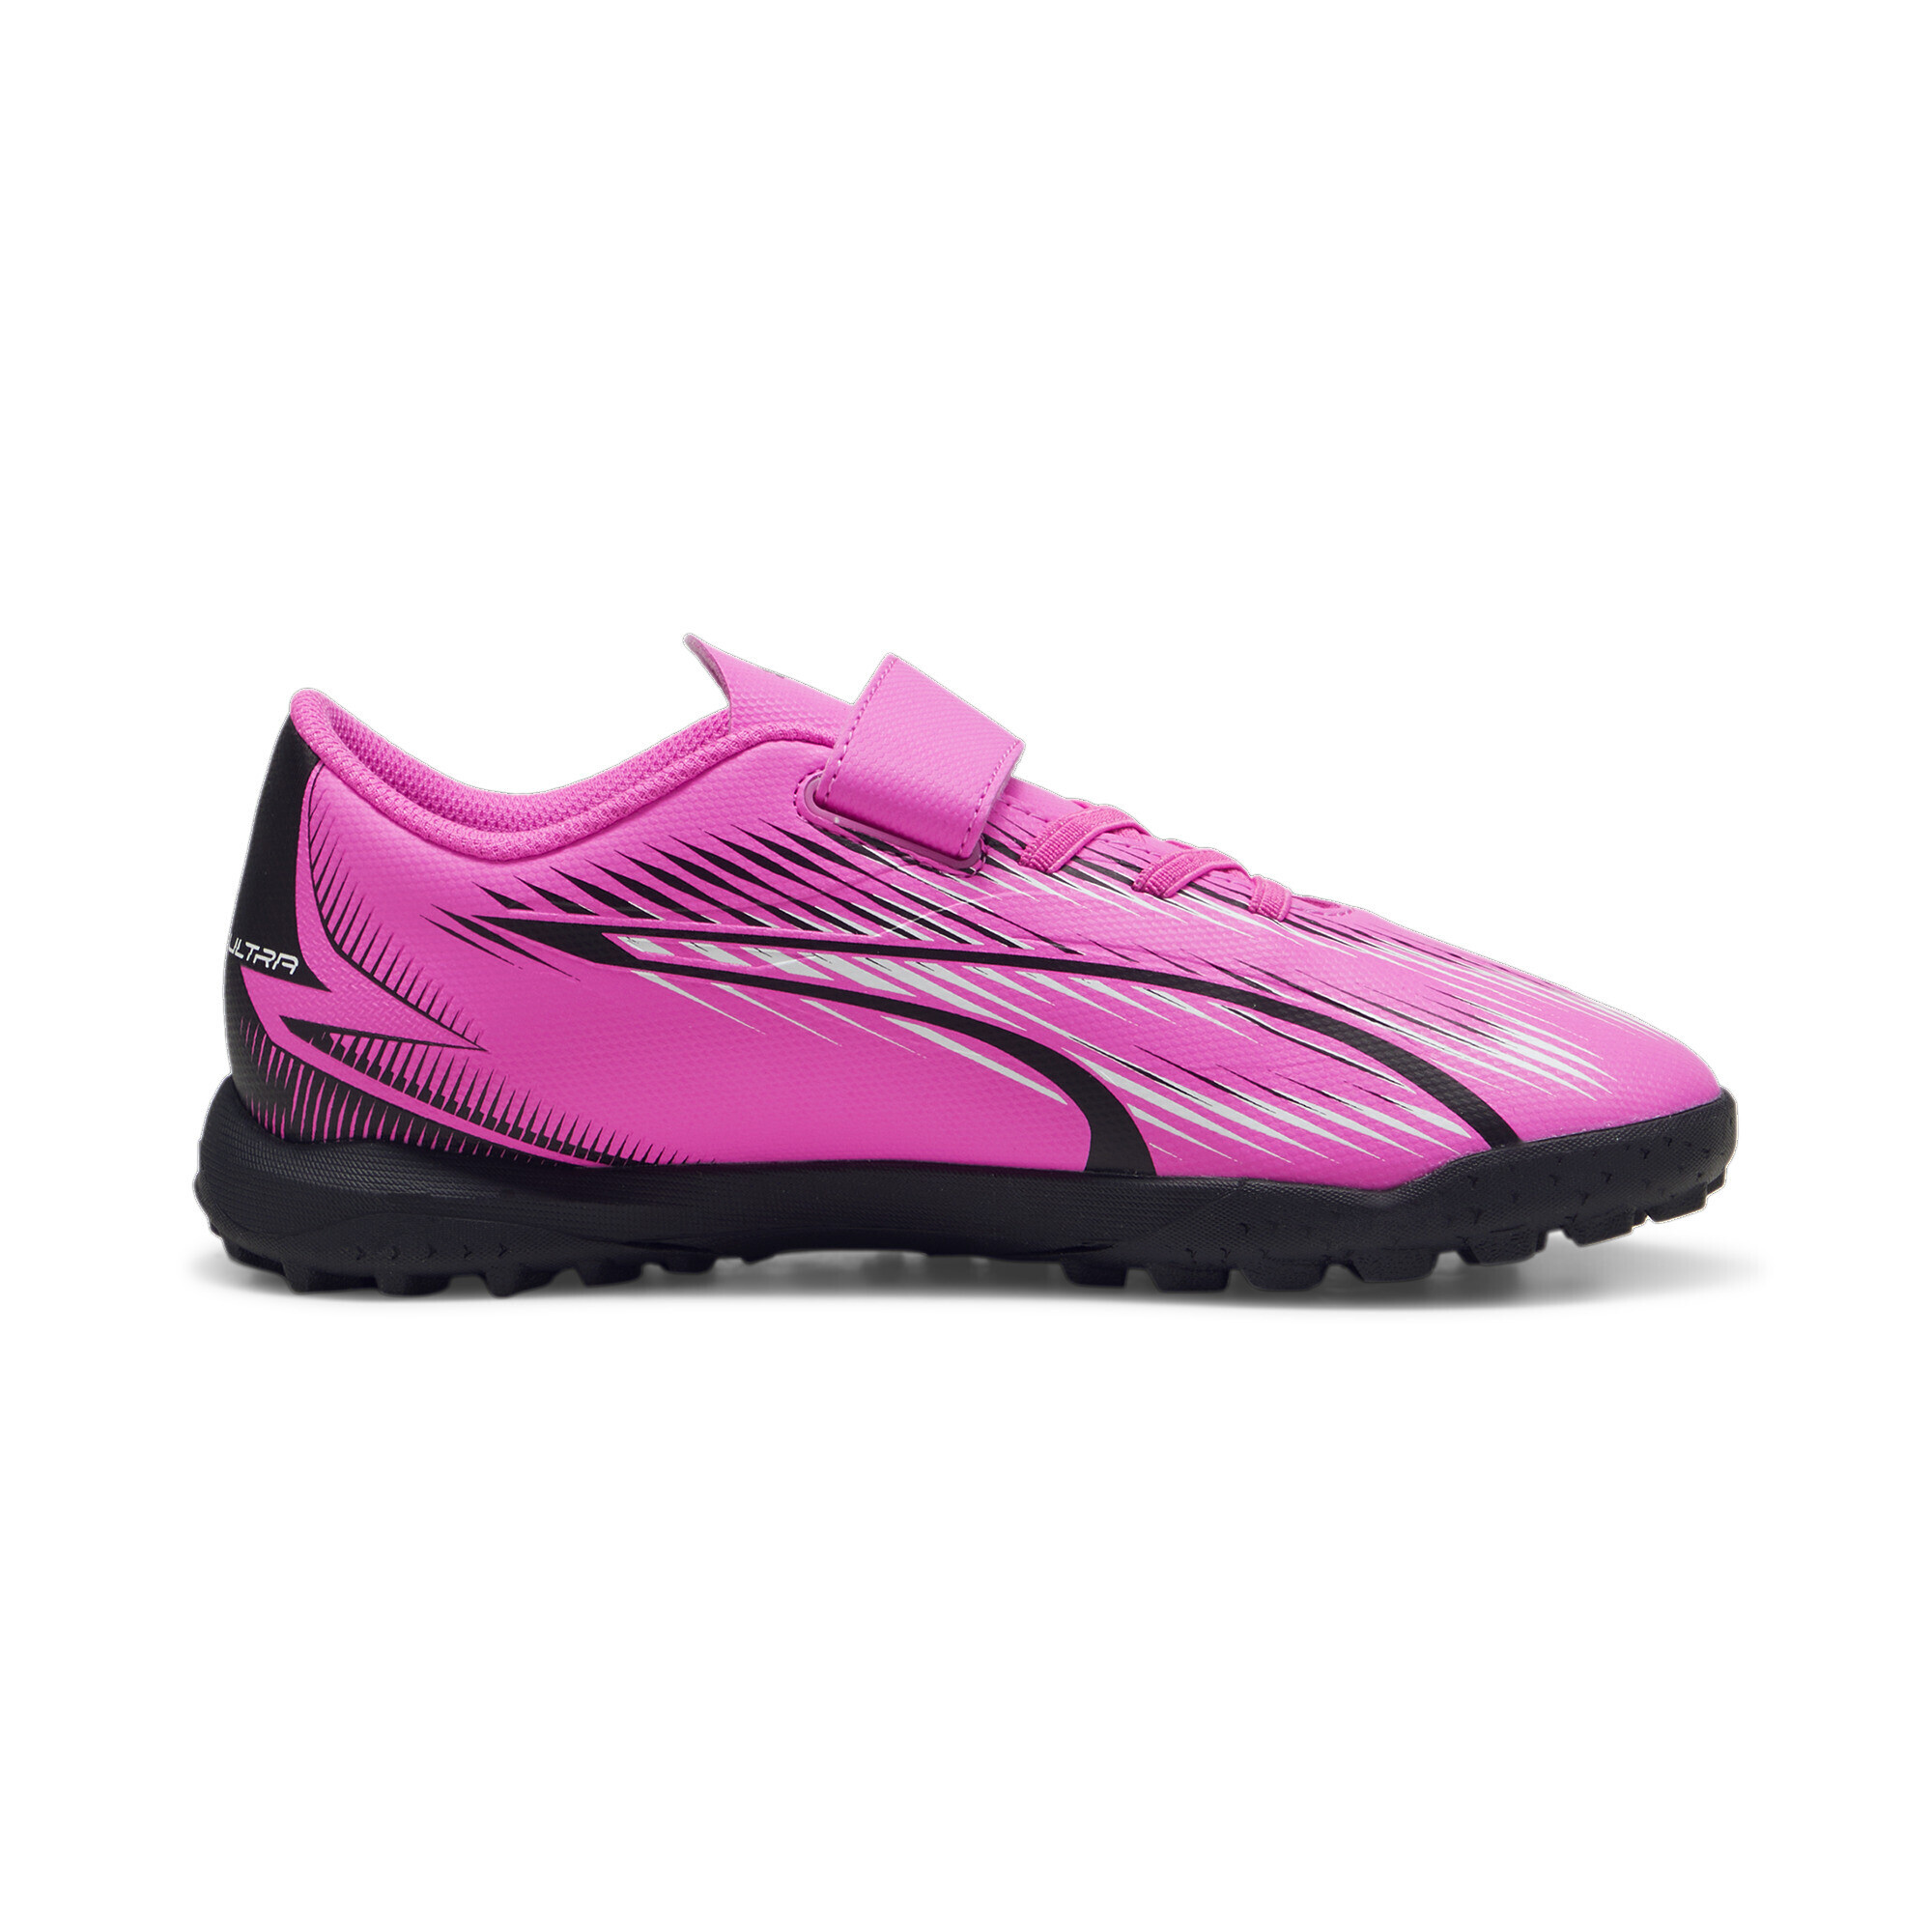 PUMA ULTRA PLAY TT Youth Football Boots In Pink, Size EU 38.5